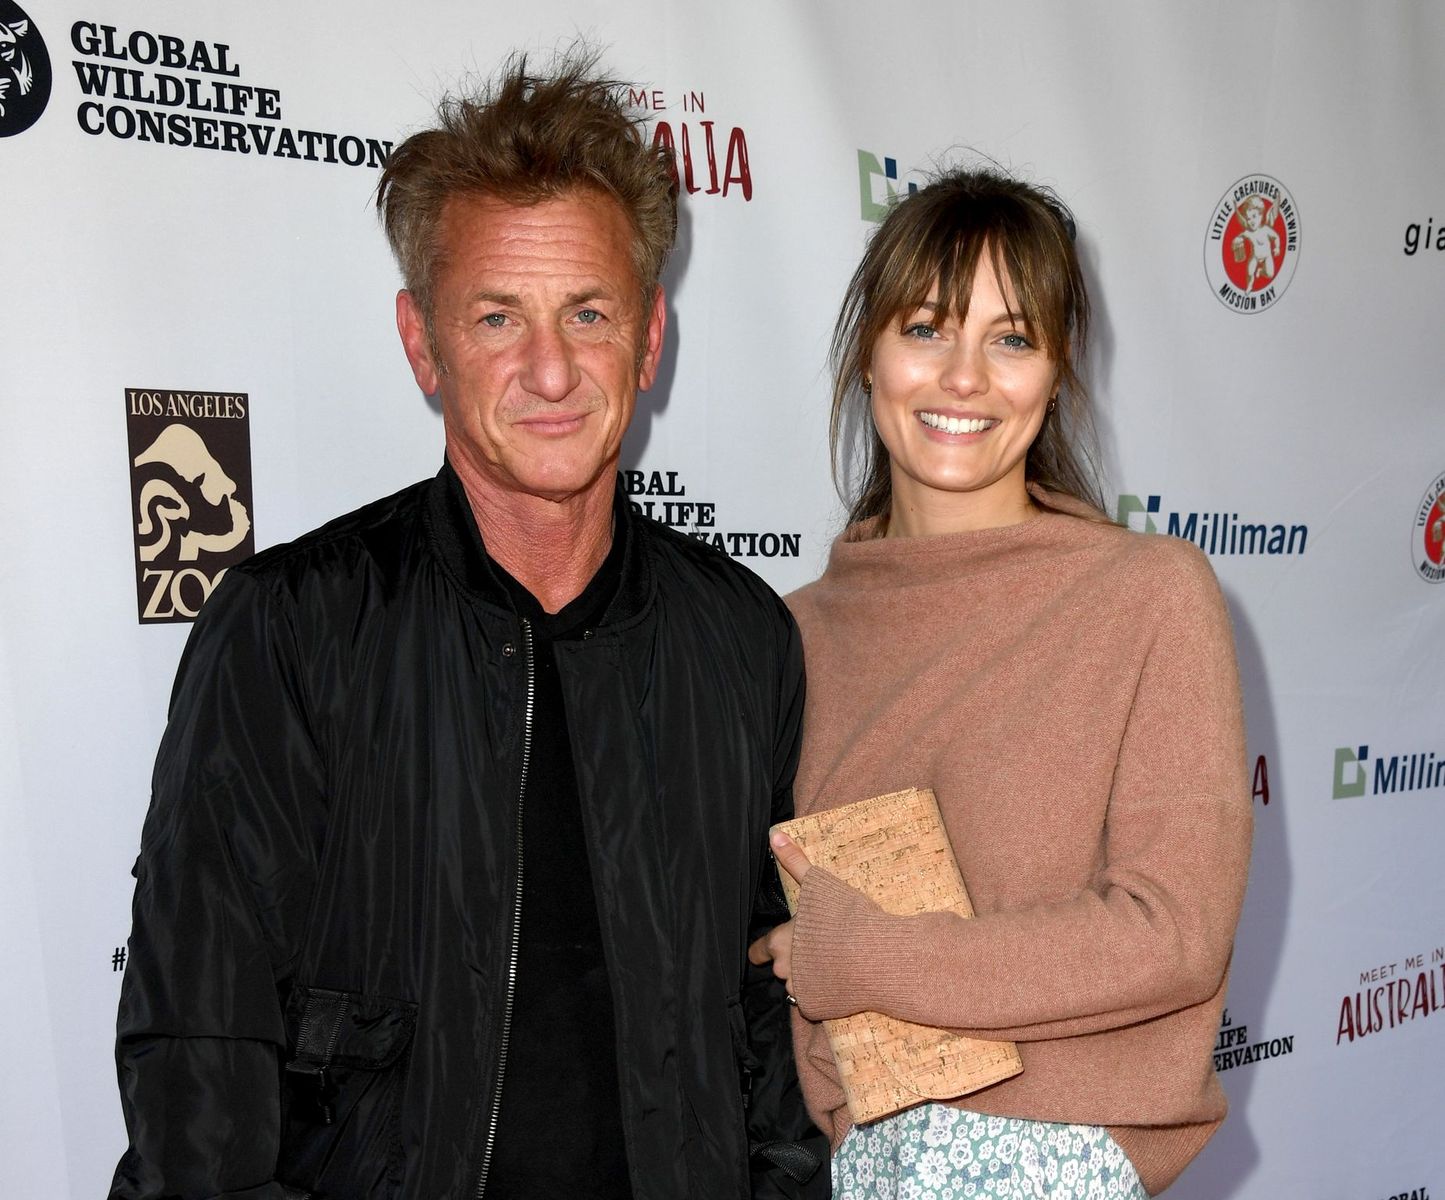 Sean Penn and Leila George at the "Meet Me In Australia" event benefiting Australia Wildfire Relief Efforts at Los Angeles Zoo on March 08, 2020, in California | Photo: Kevin Winter/Getty Images